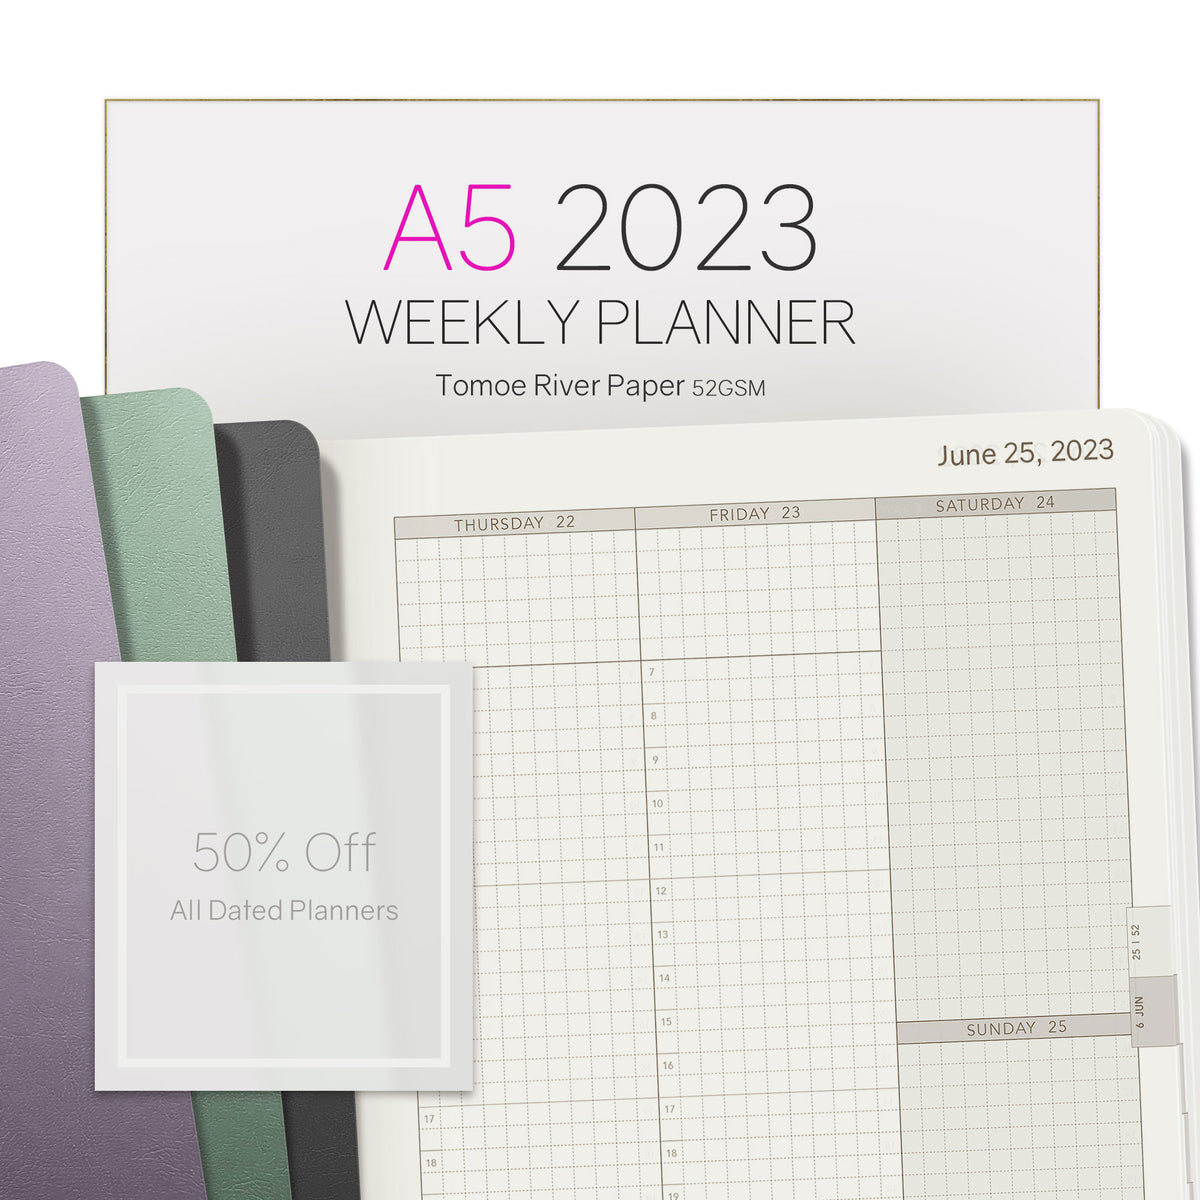 Sale  2020 A5 Weekly Planner - 52gsm Legacy Tomoe River Paper